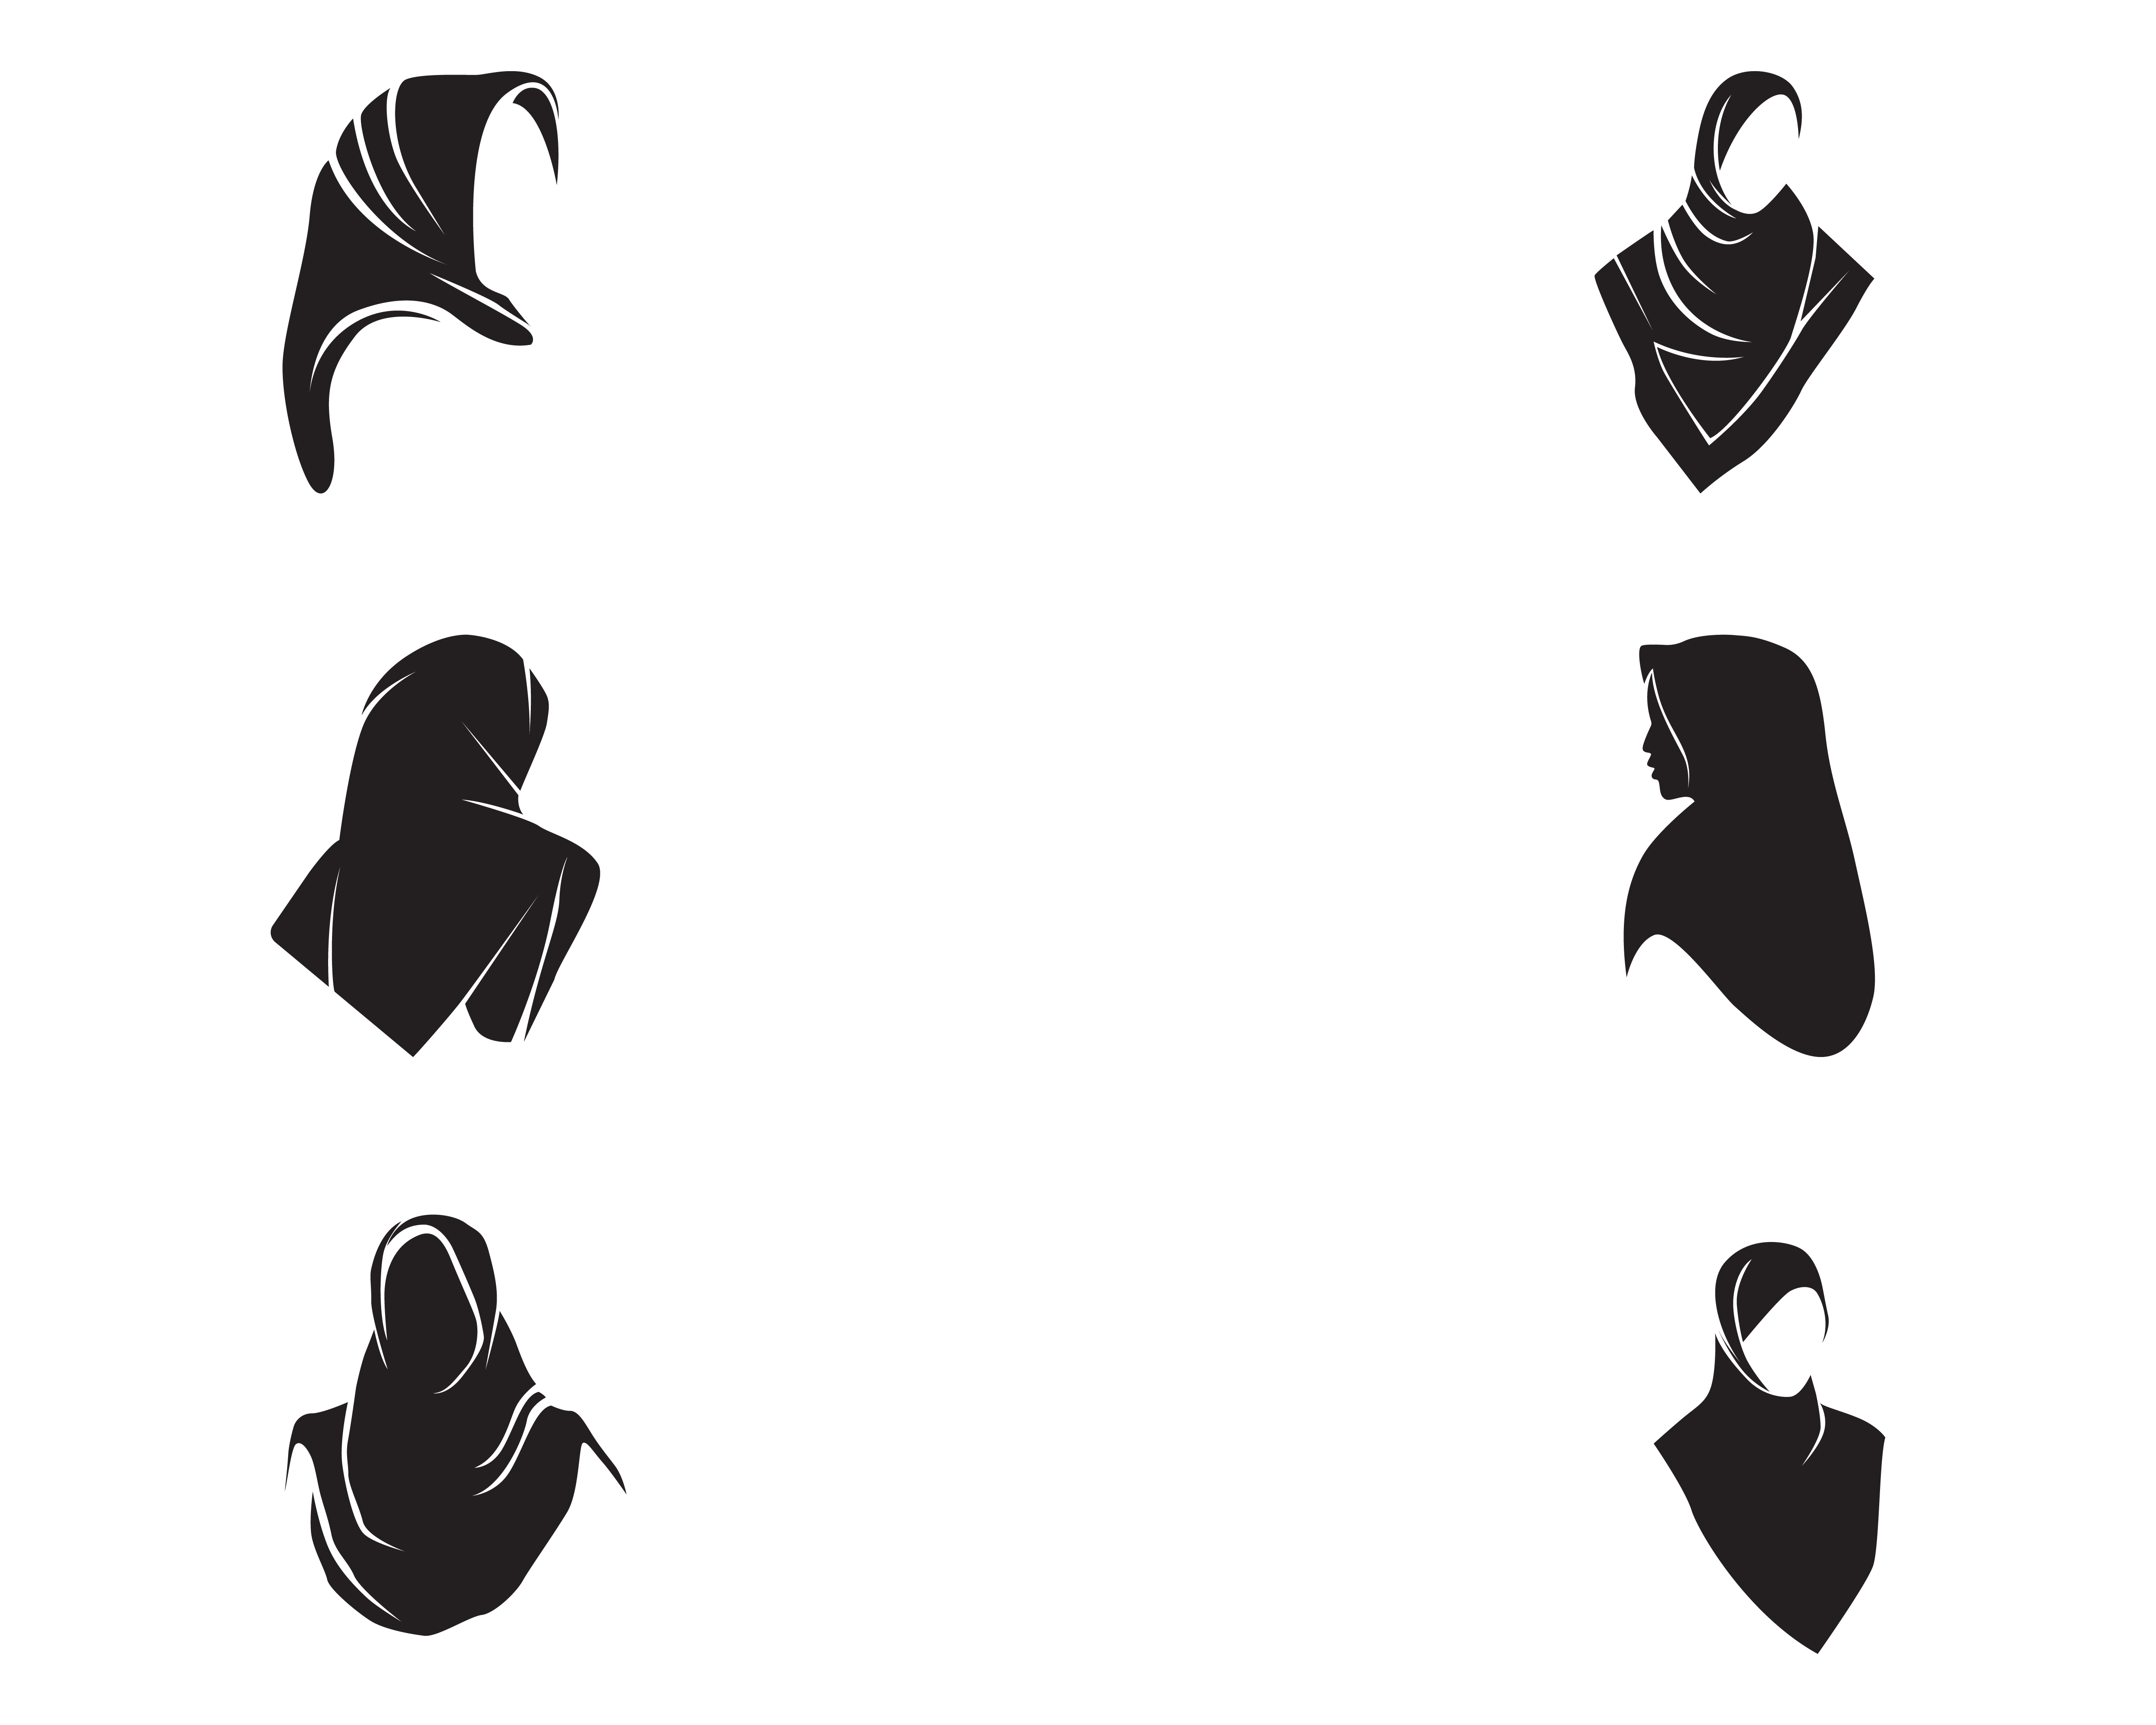  Hijab  women black silhouette  vector icons app Download 